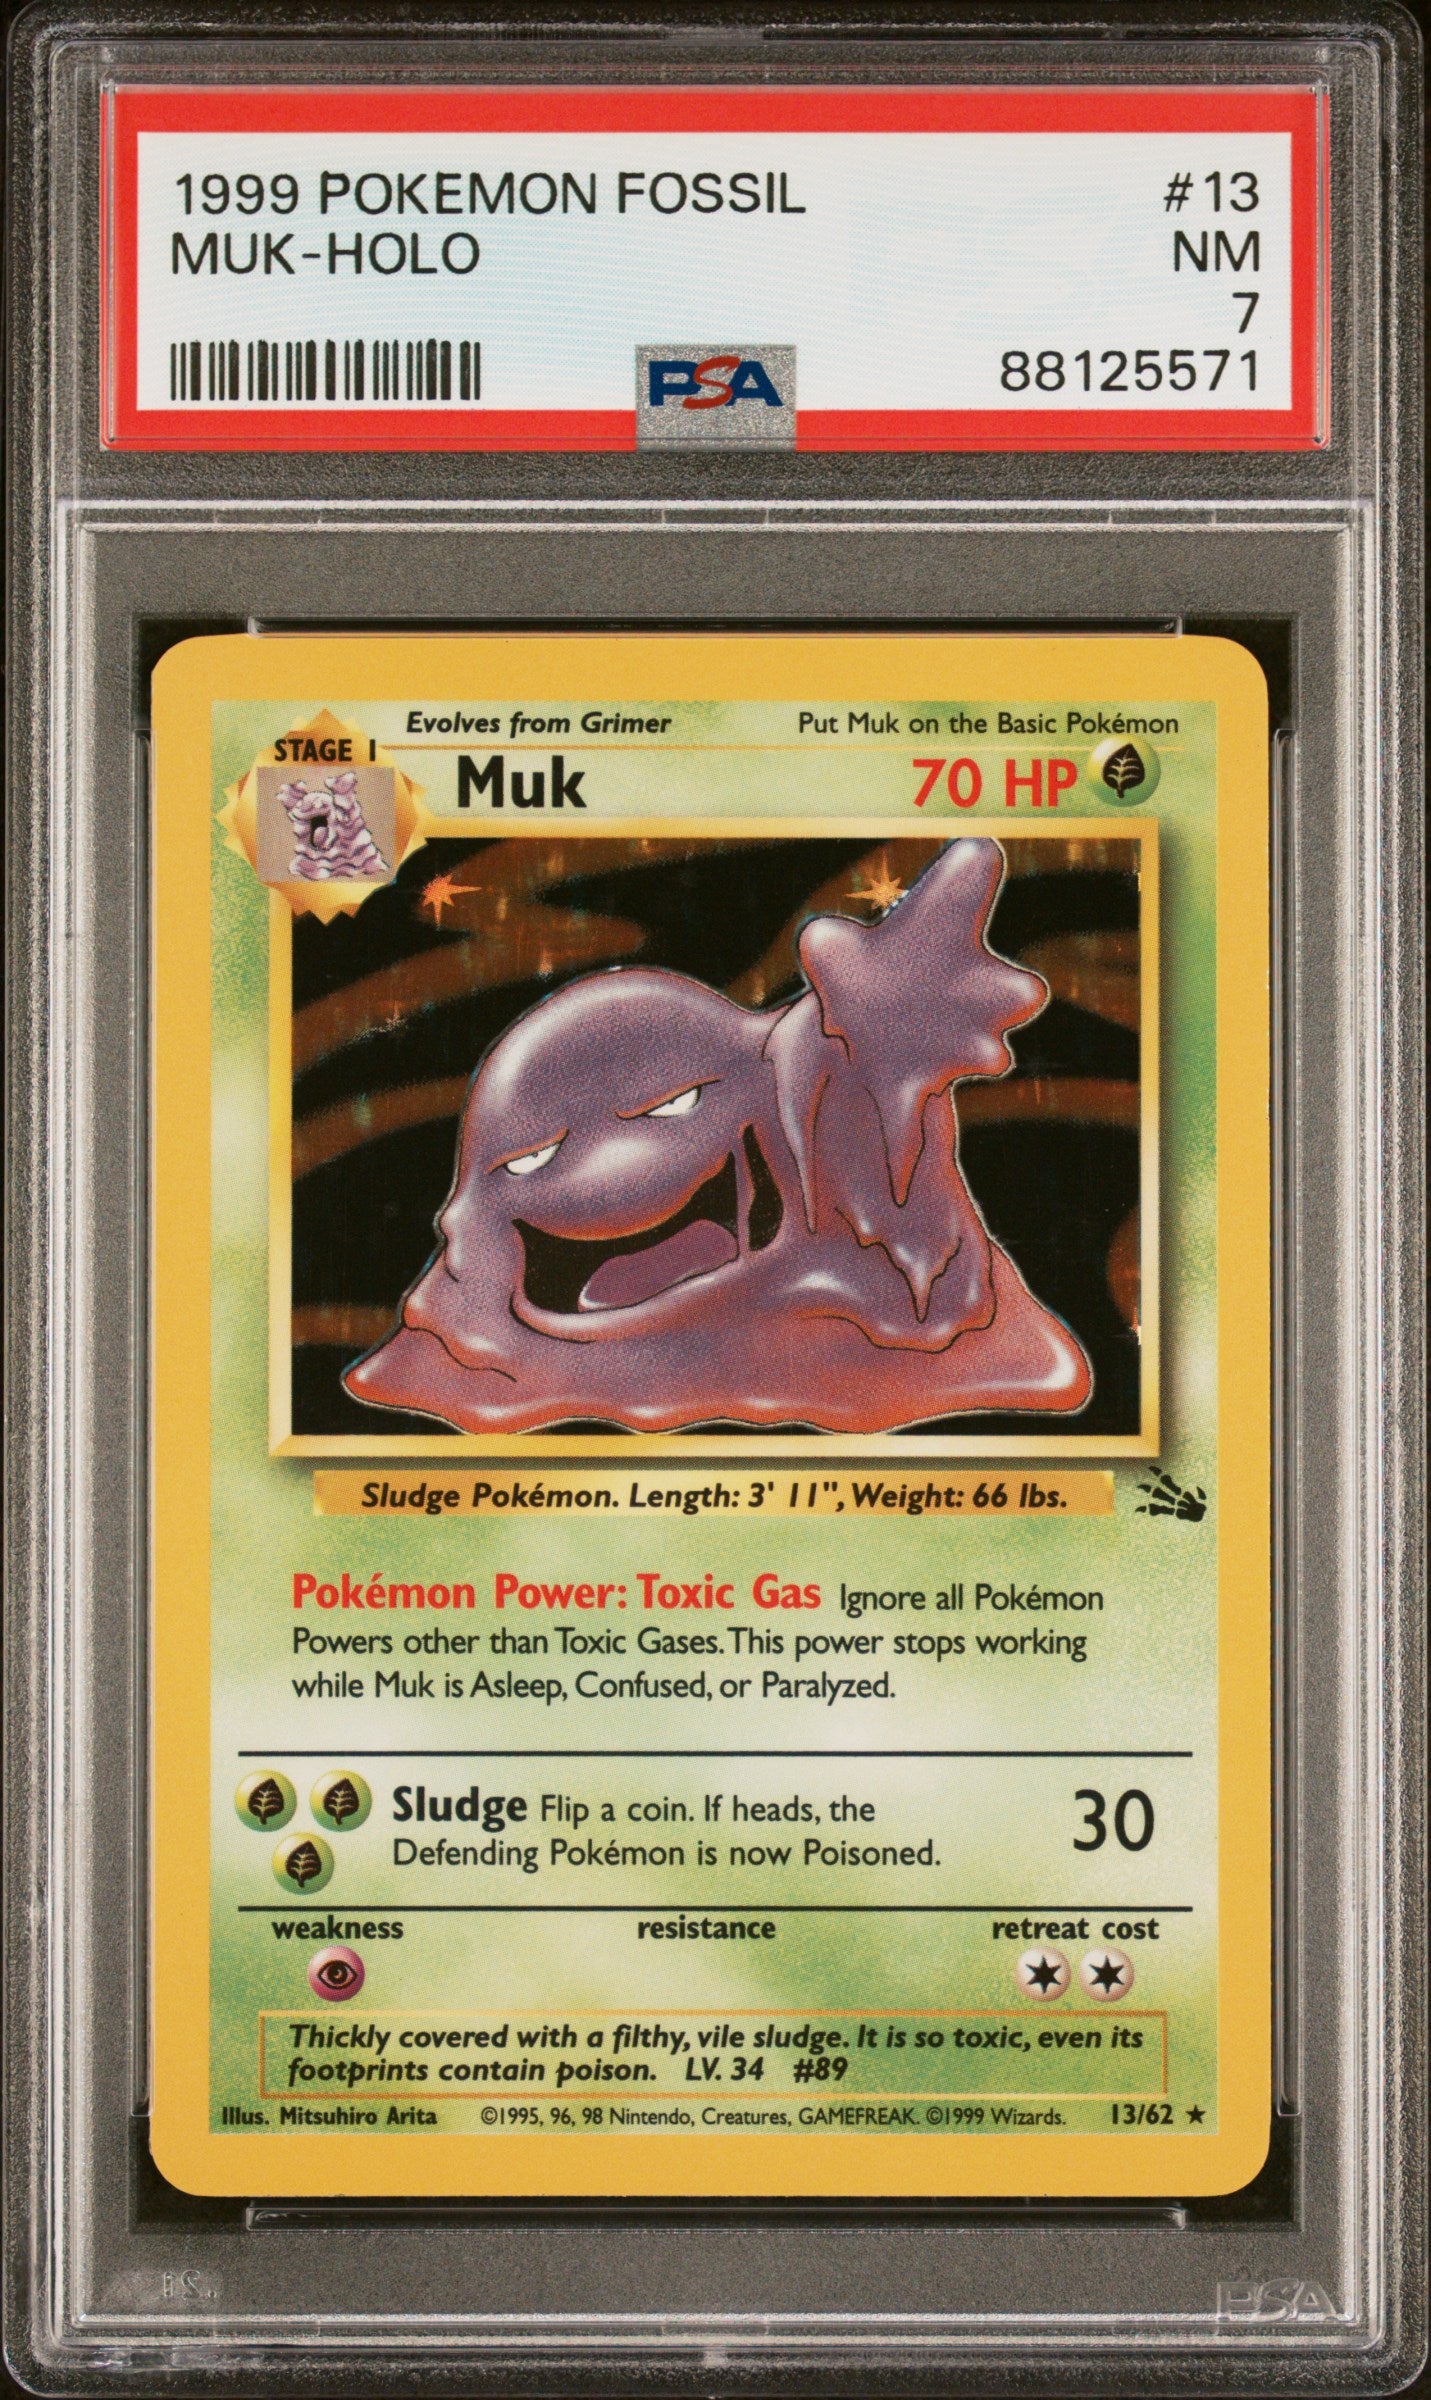 PSA 7 Muk Fossil Holo (Graded Card)